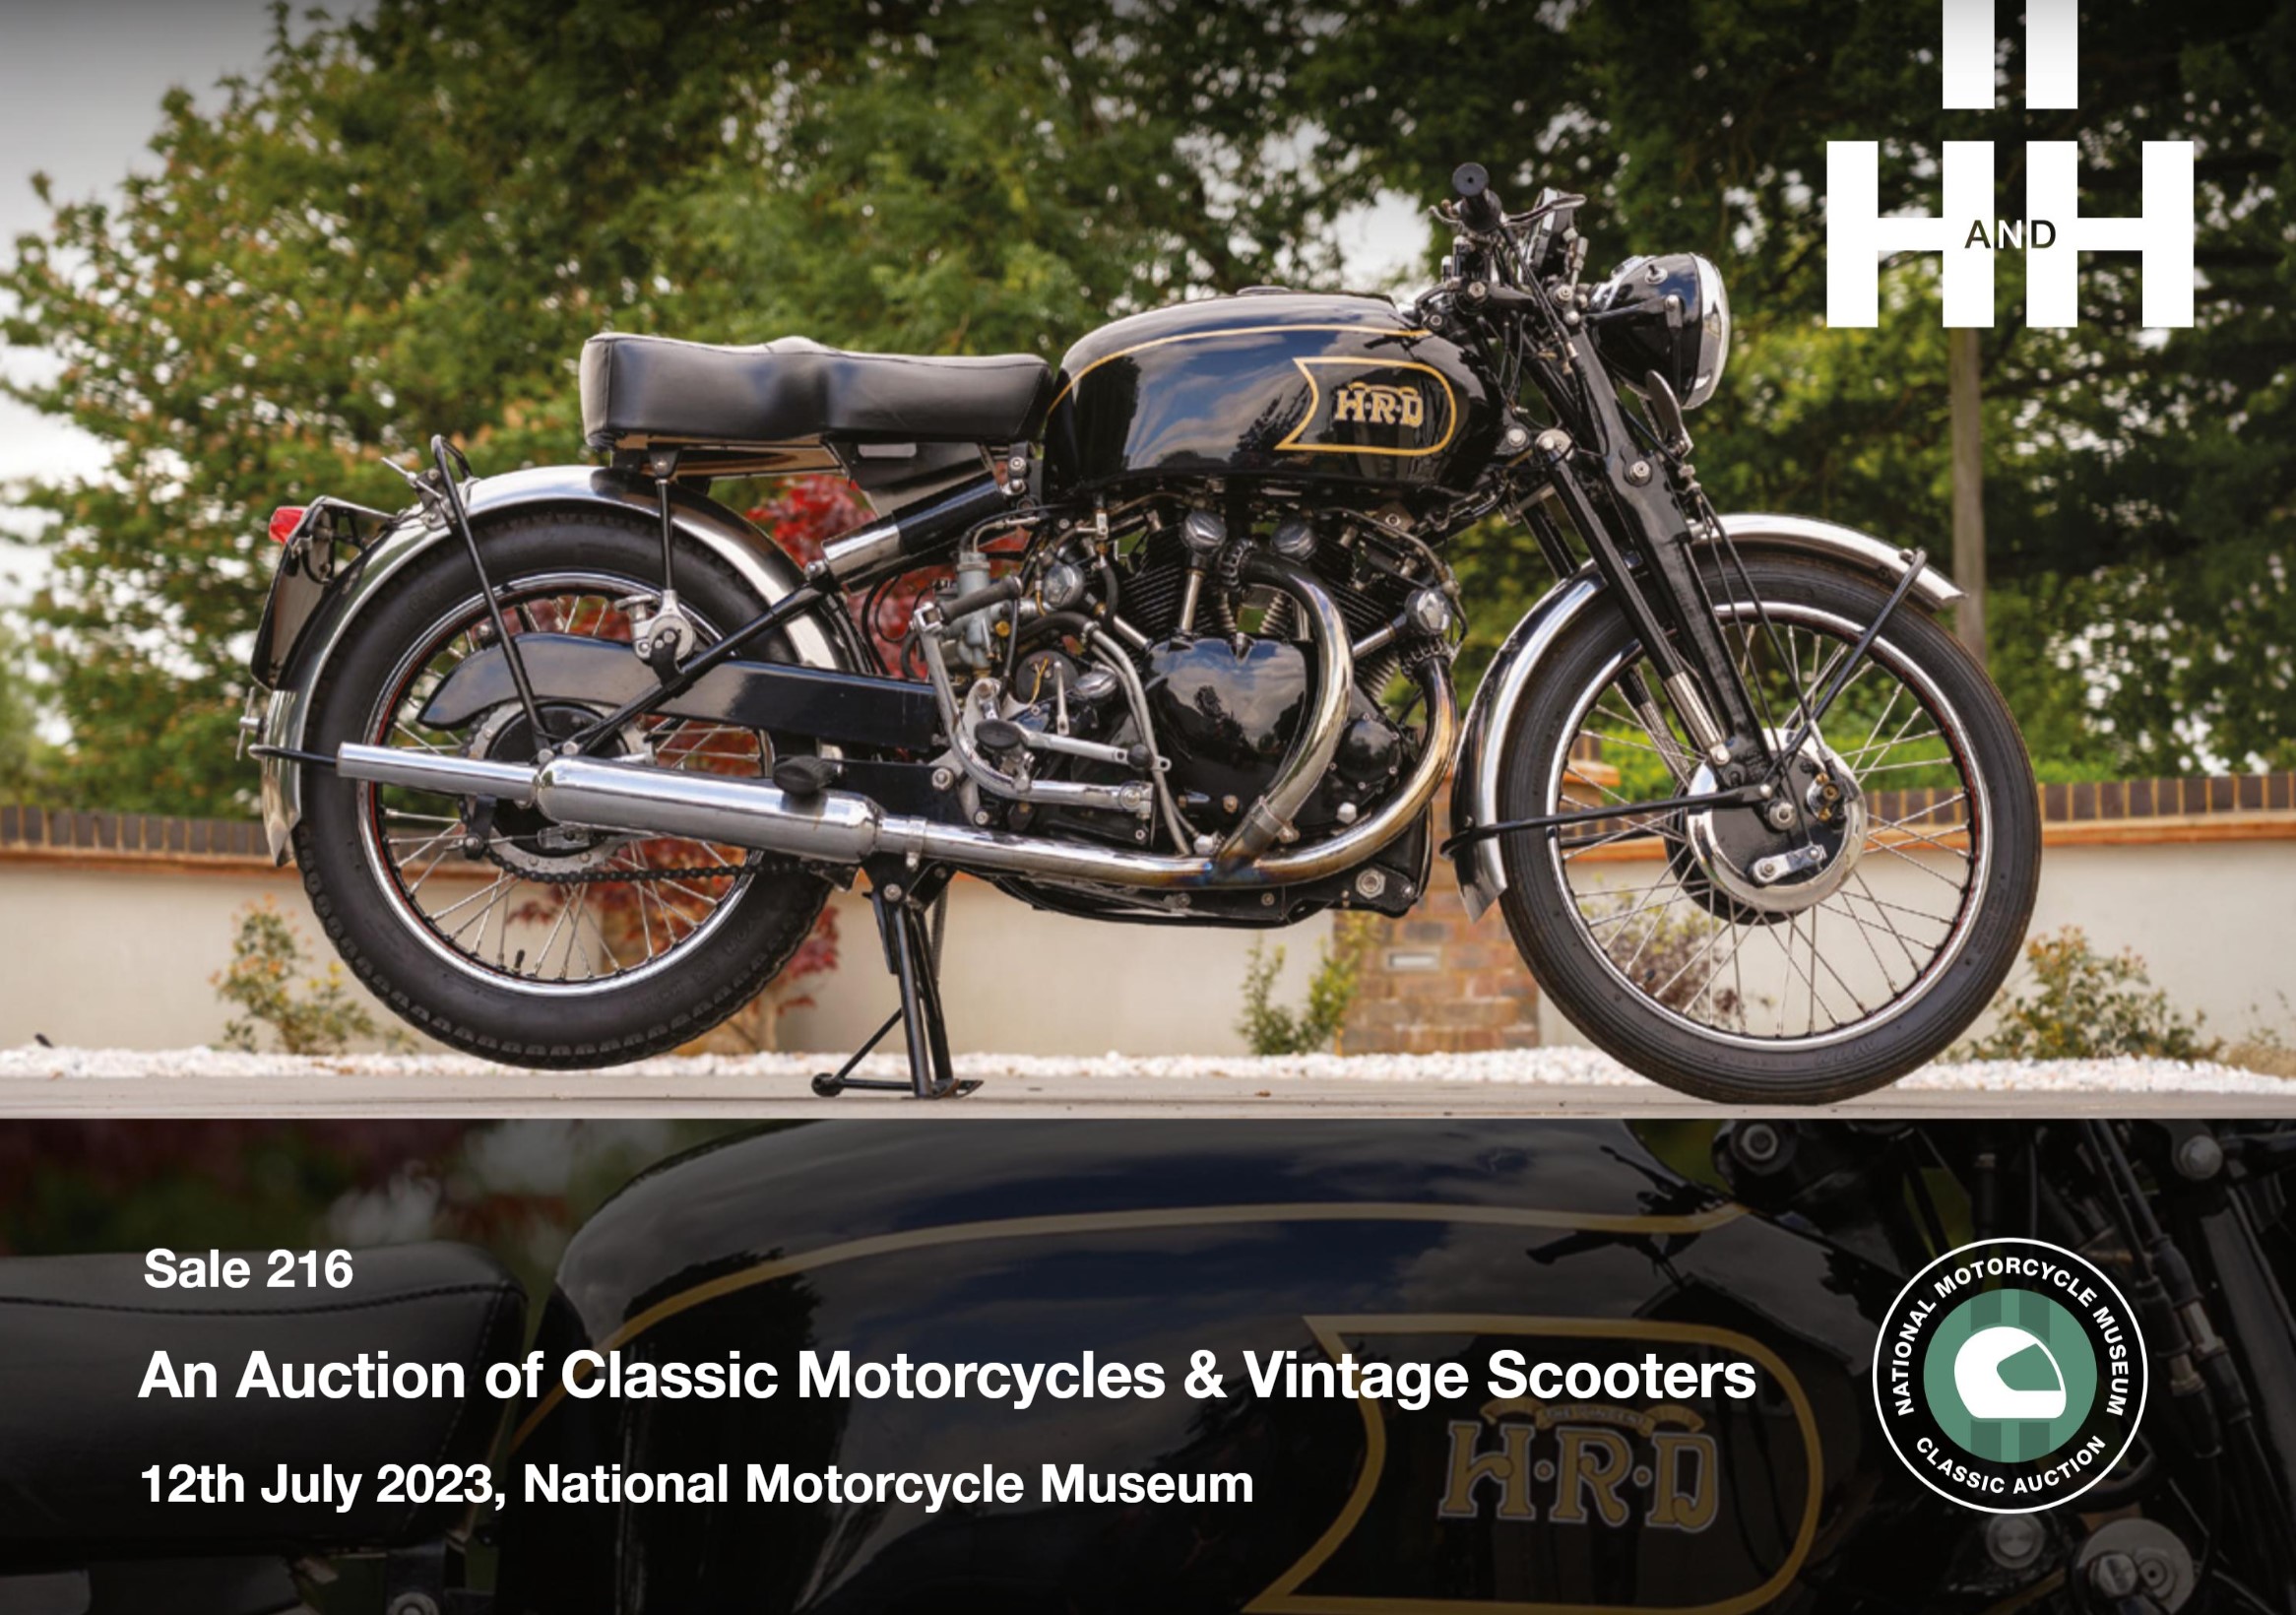 250 Motorcycles & Vintage Scooters Set To Go Under The Hammer! 